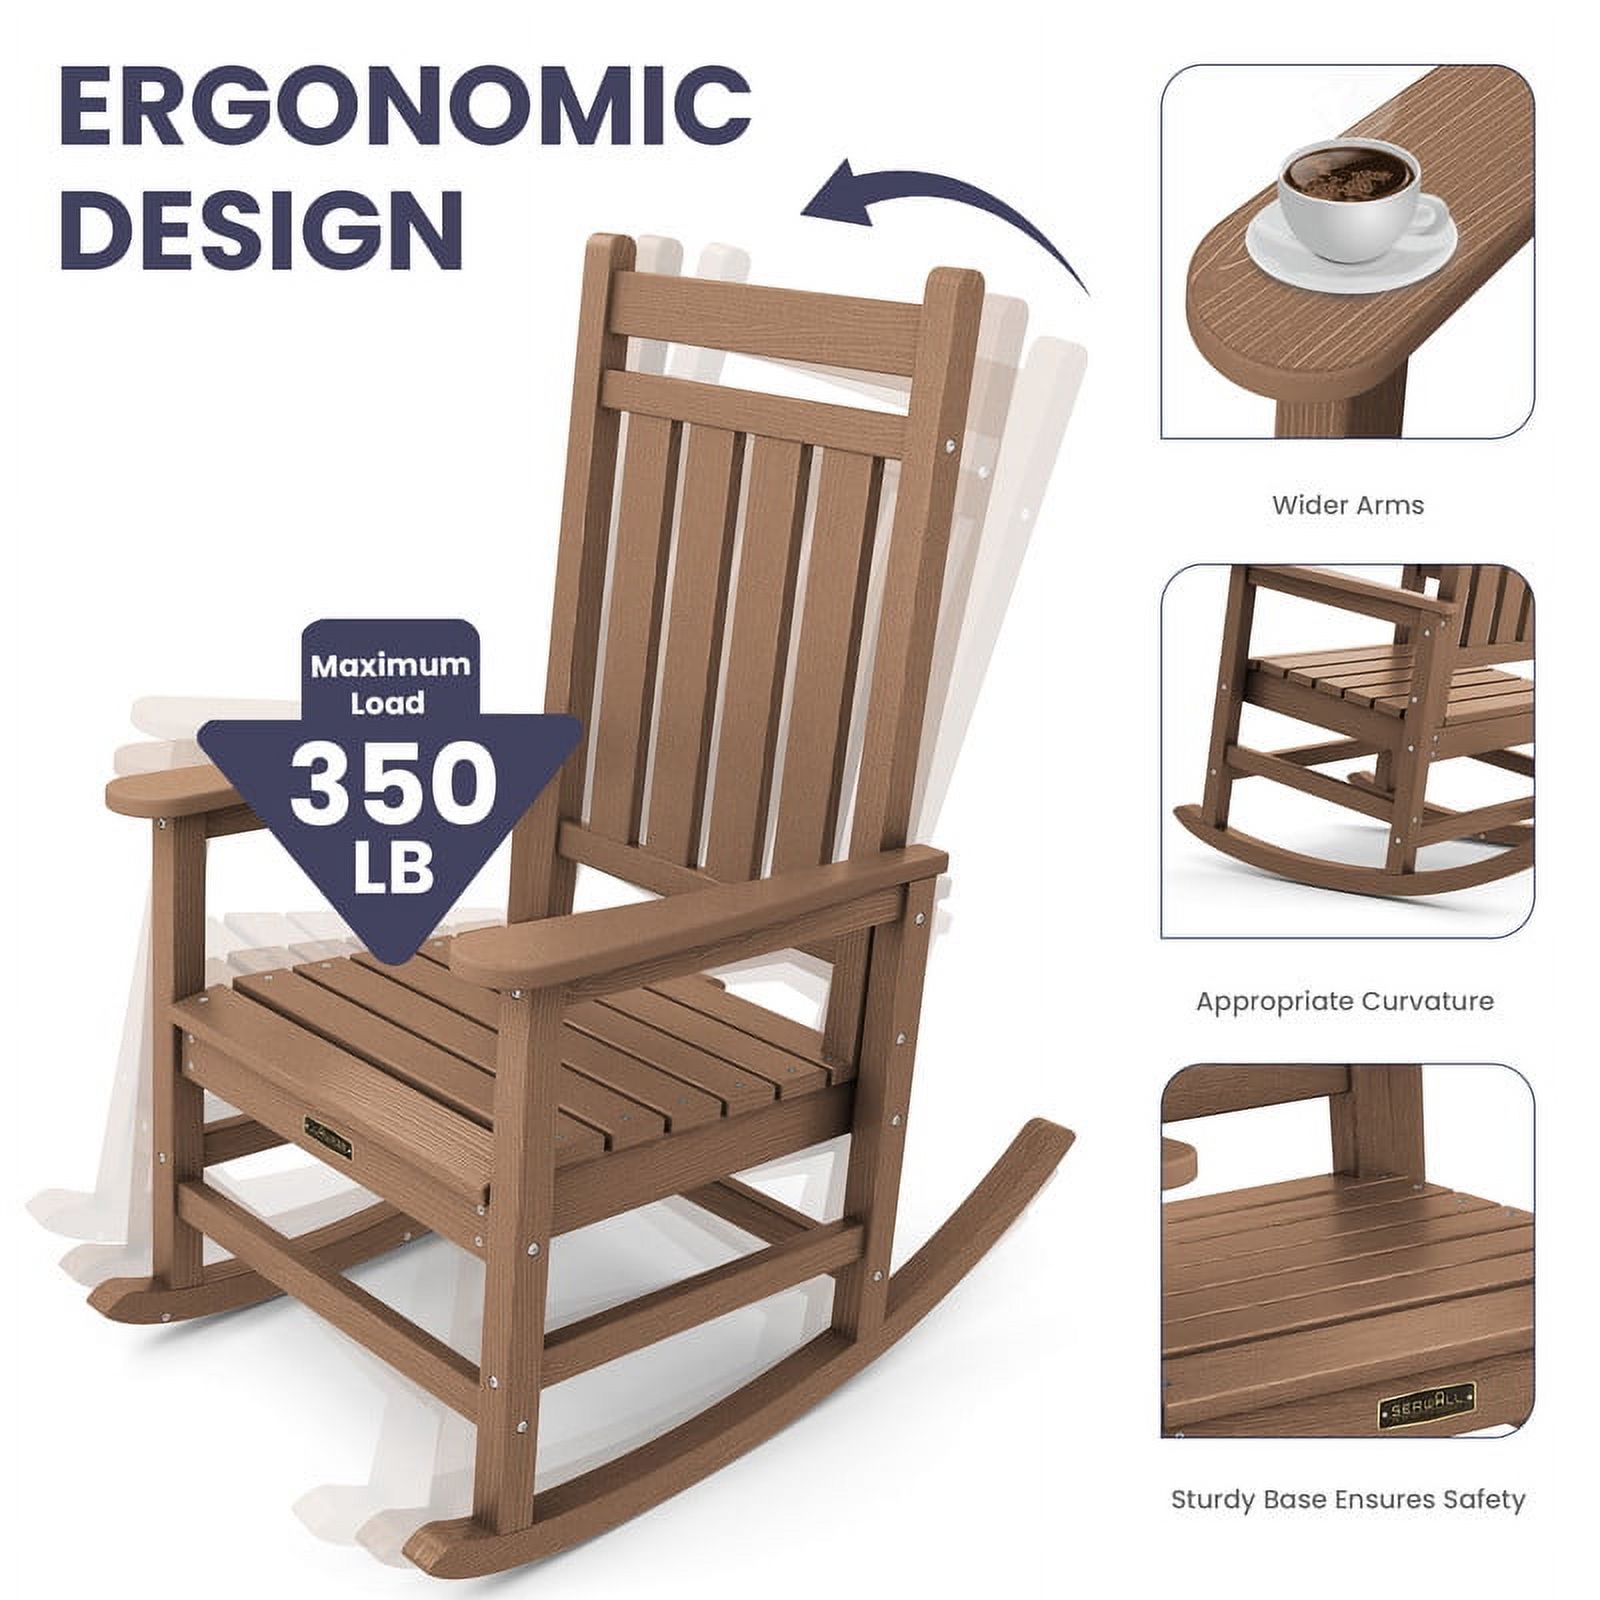 ROWHY Outdoor Oversized Slat Rocking Chair, Brown - image 3 of 6